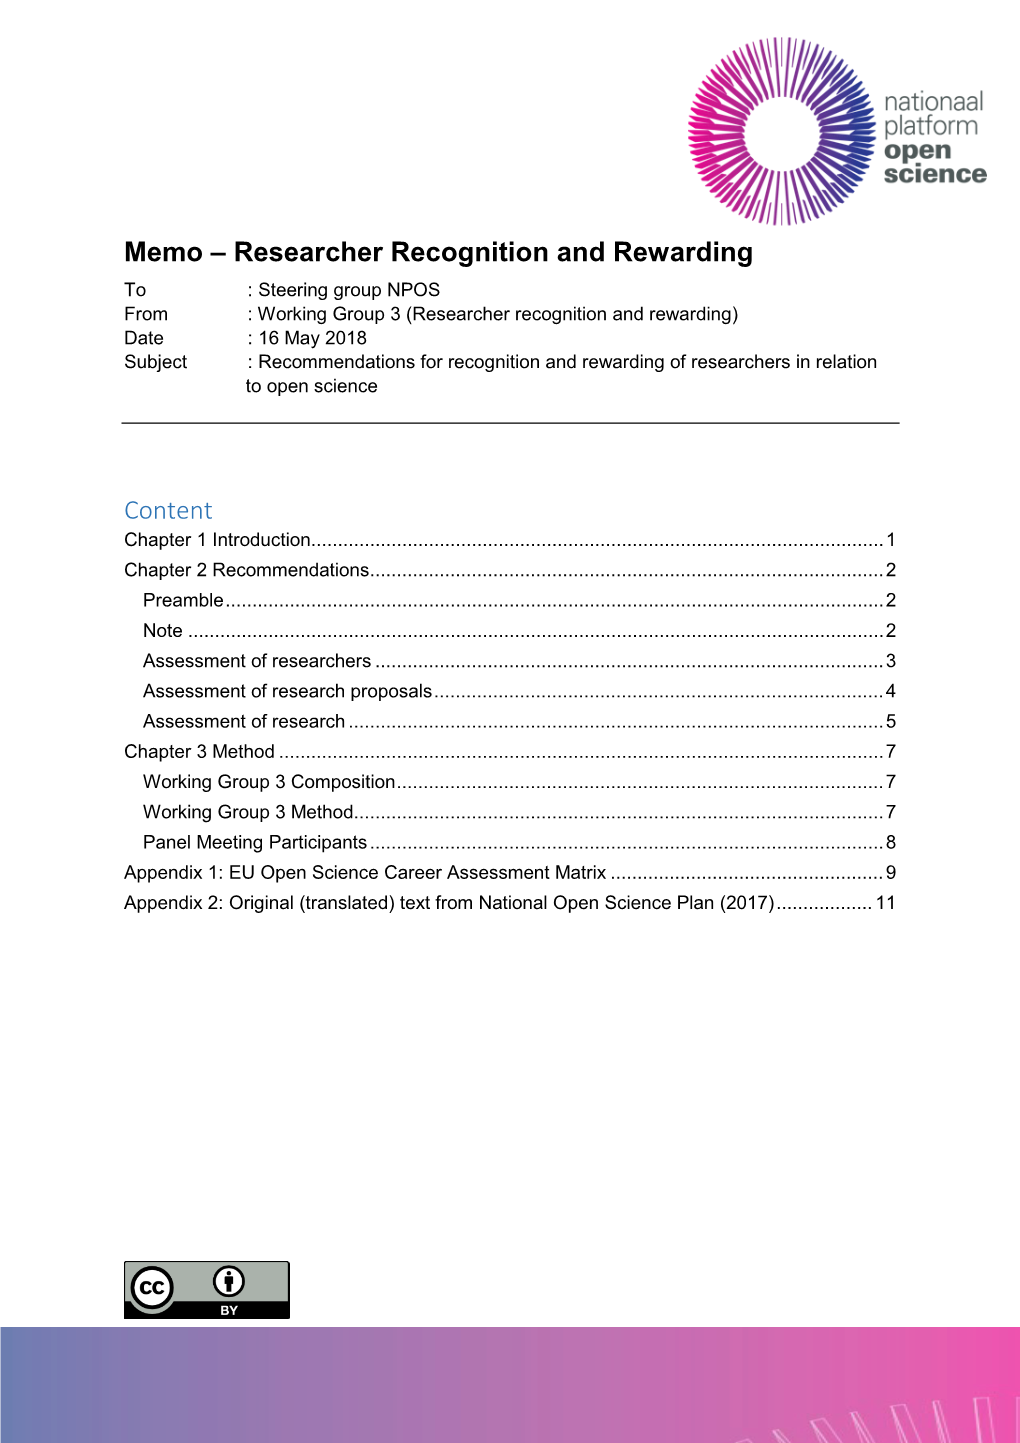 Memo – Researcher Recognition and Rewarding Content